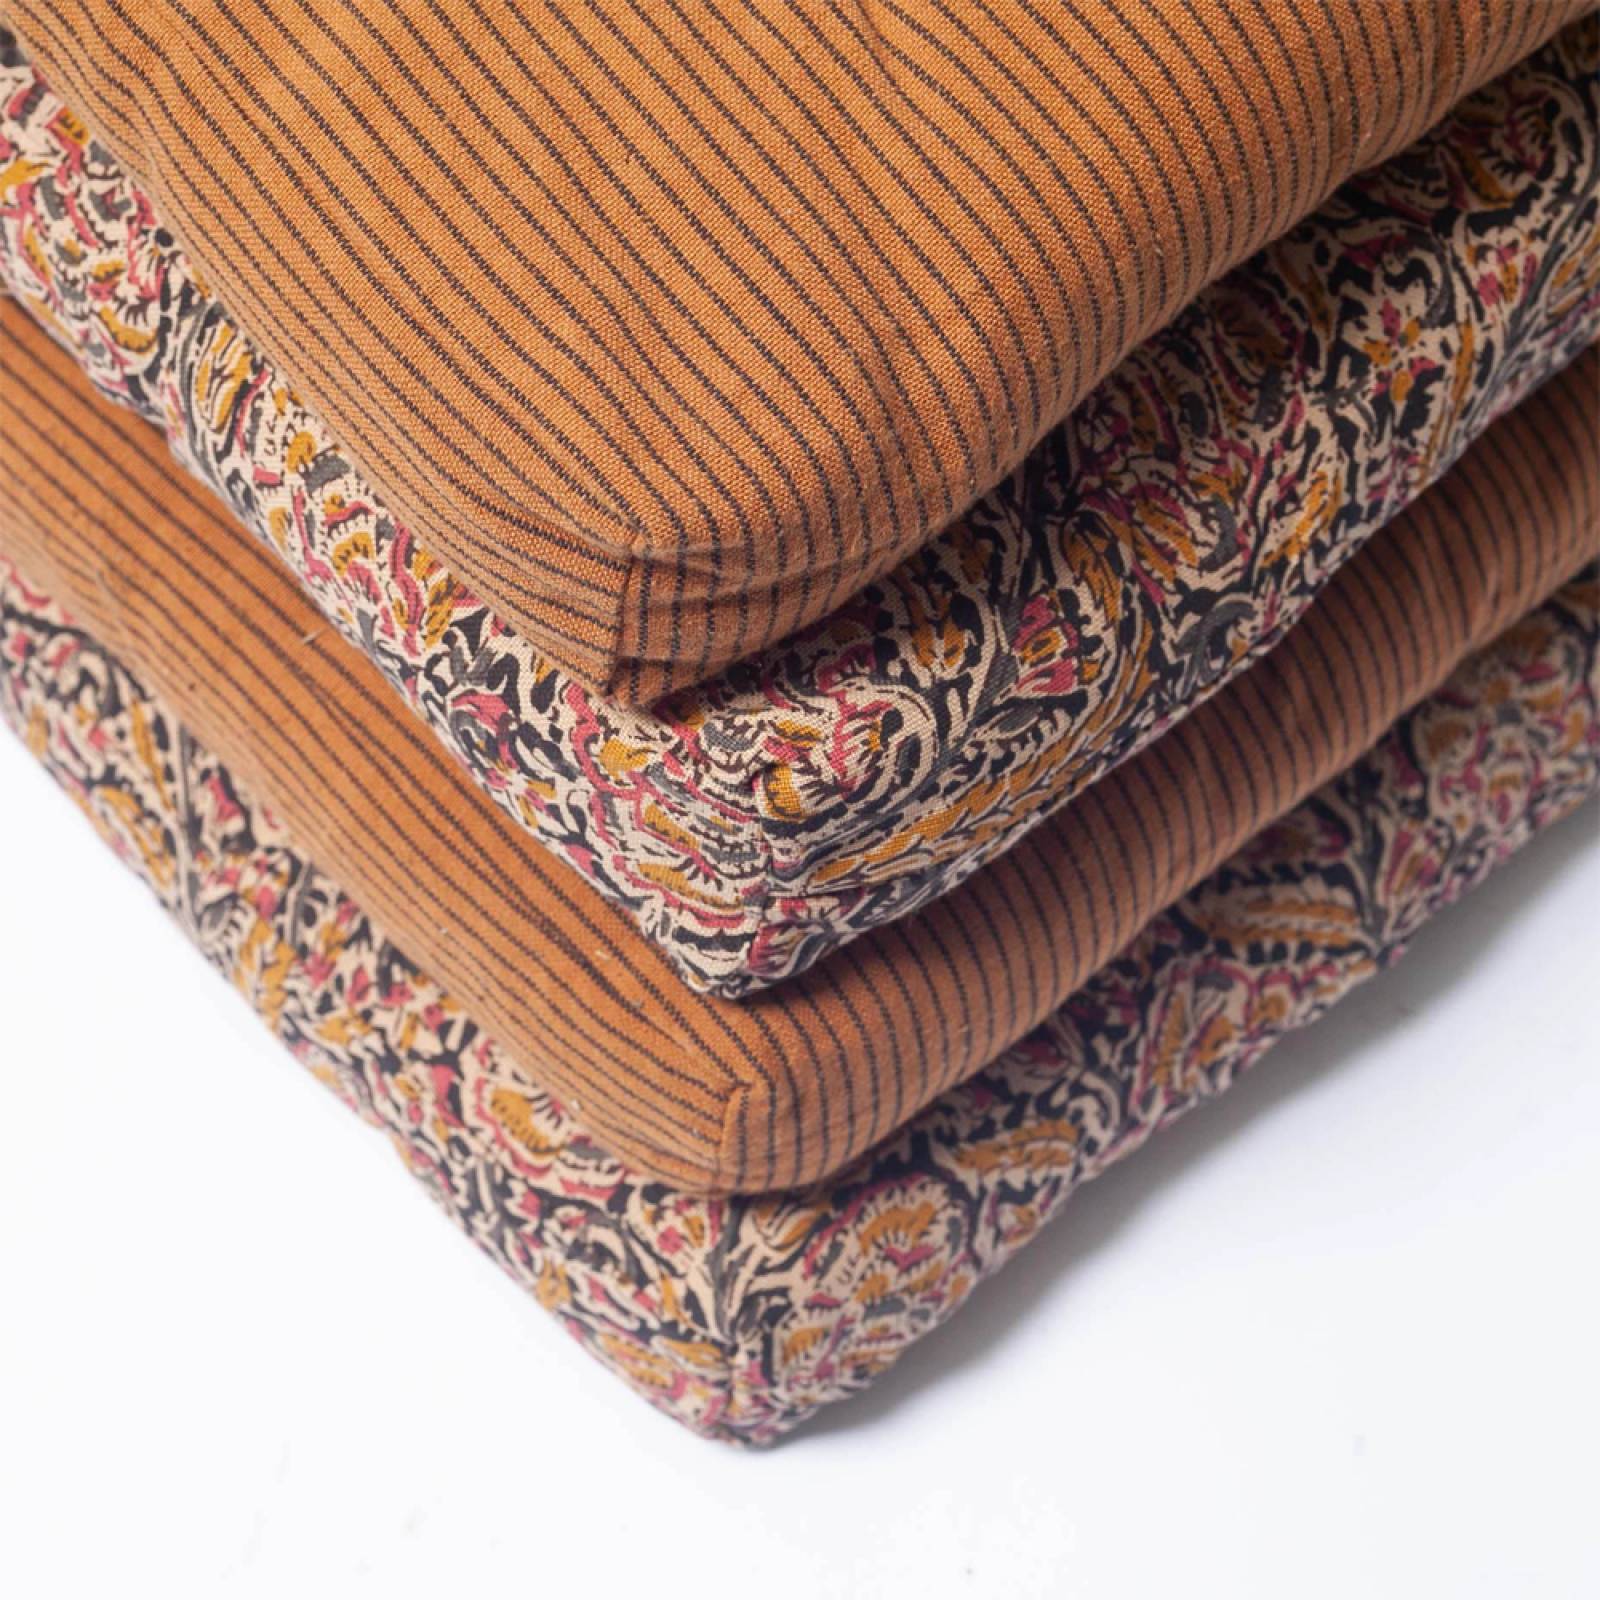 Printed Seat Pad Cushion In Striped Almond thumbnails